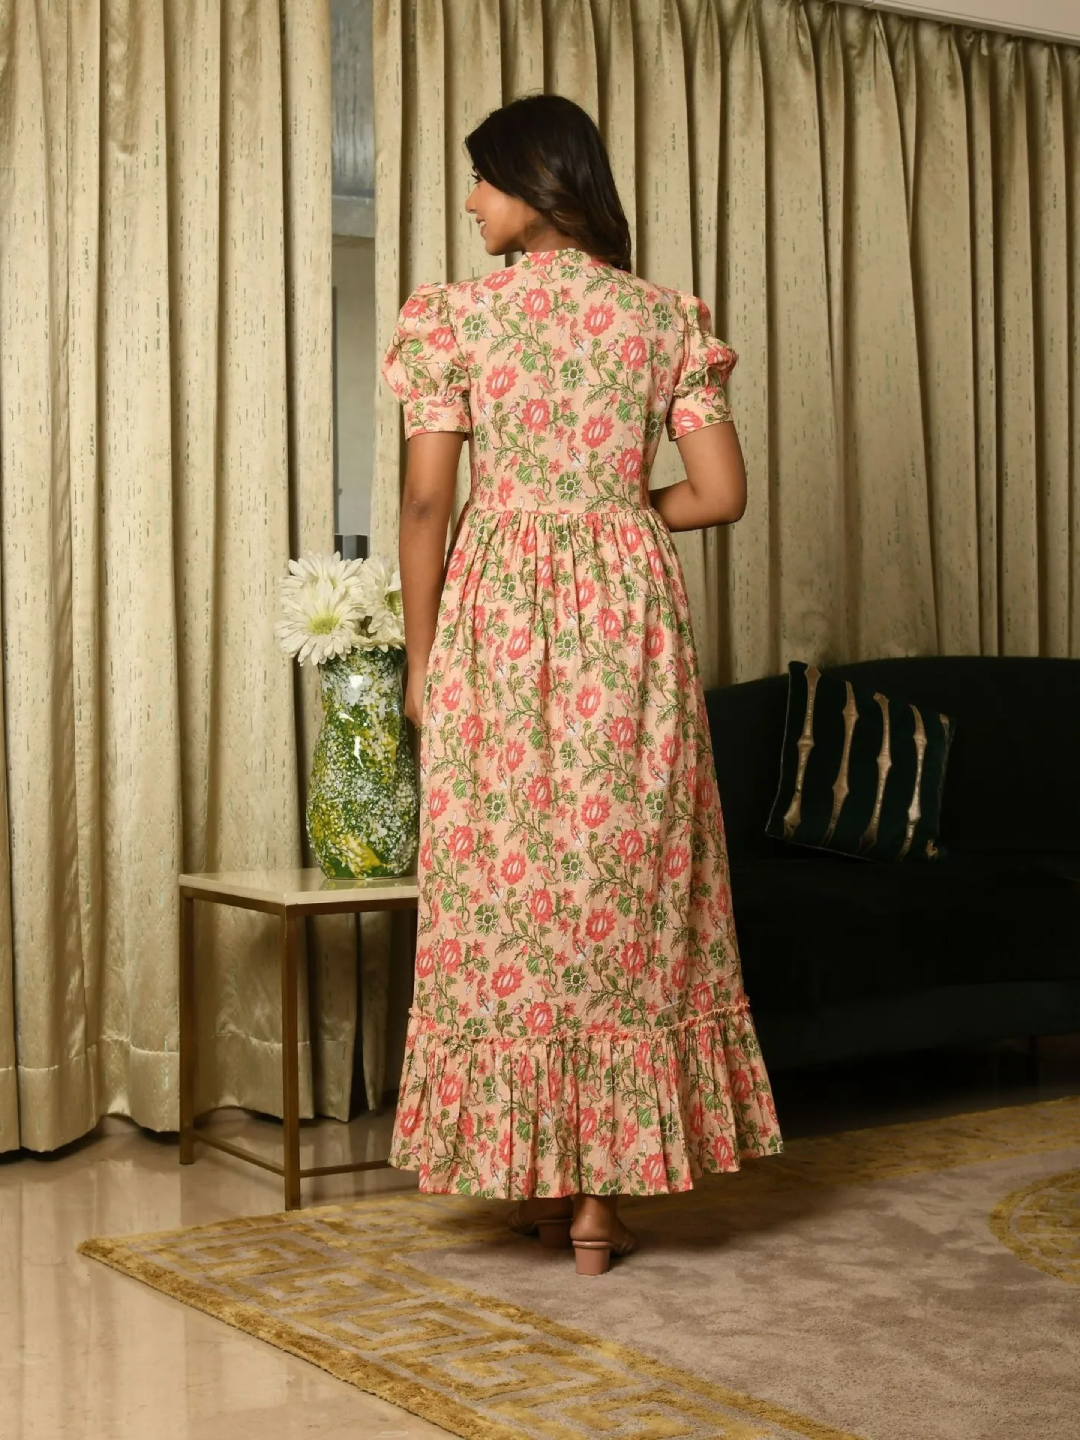 Vernazza Floral Flared Dress